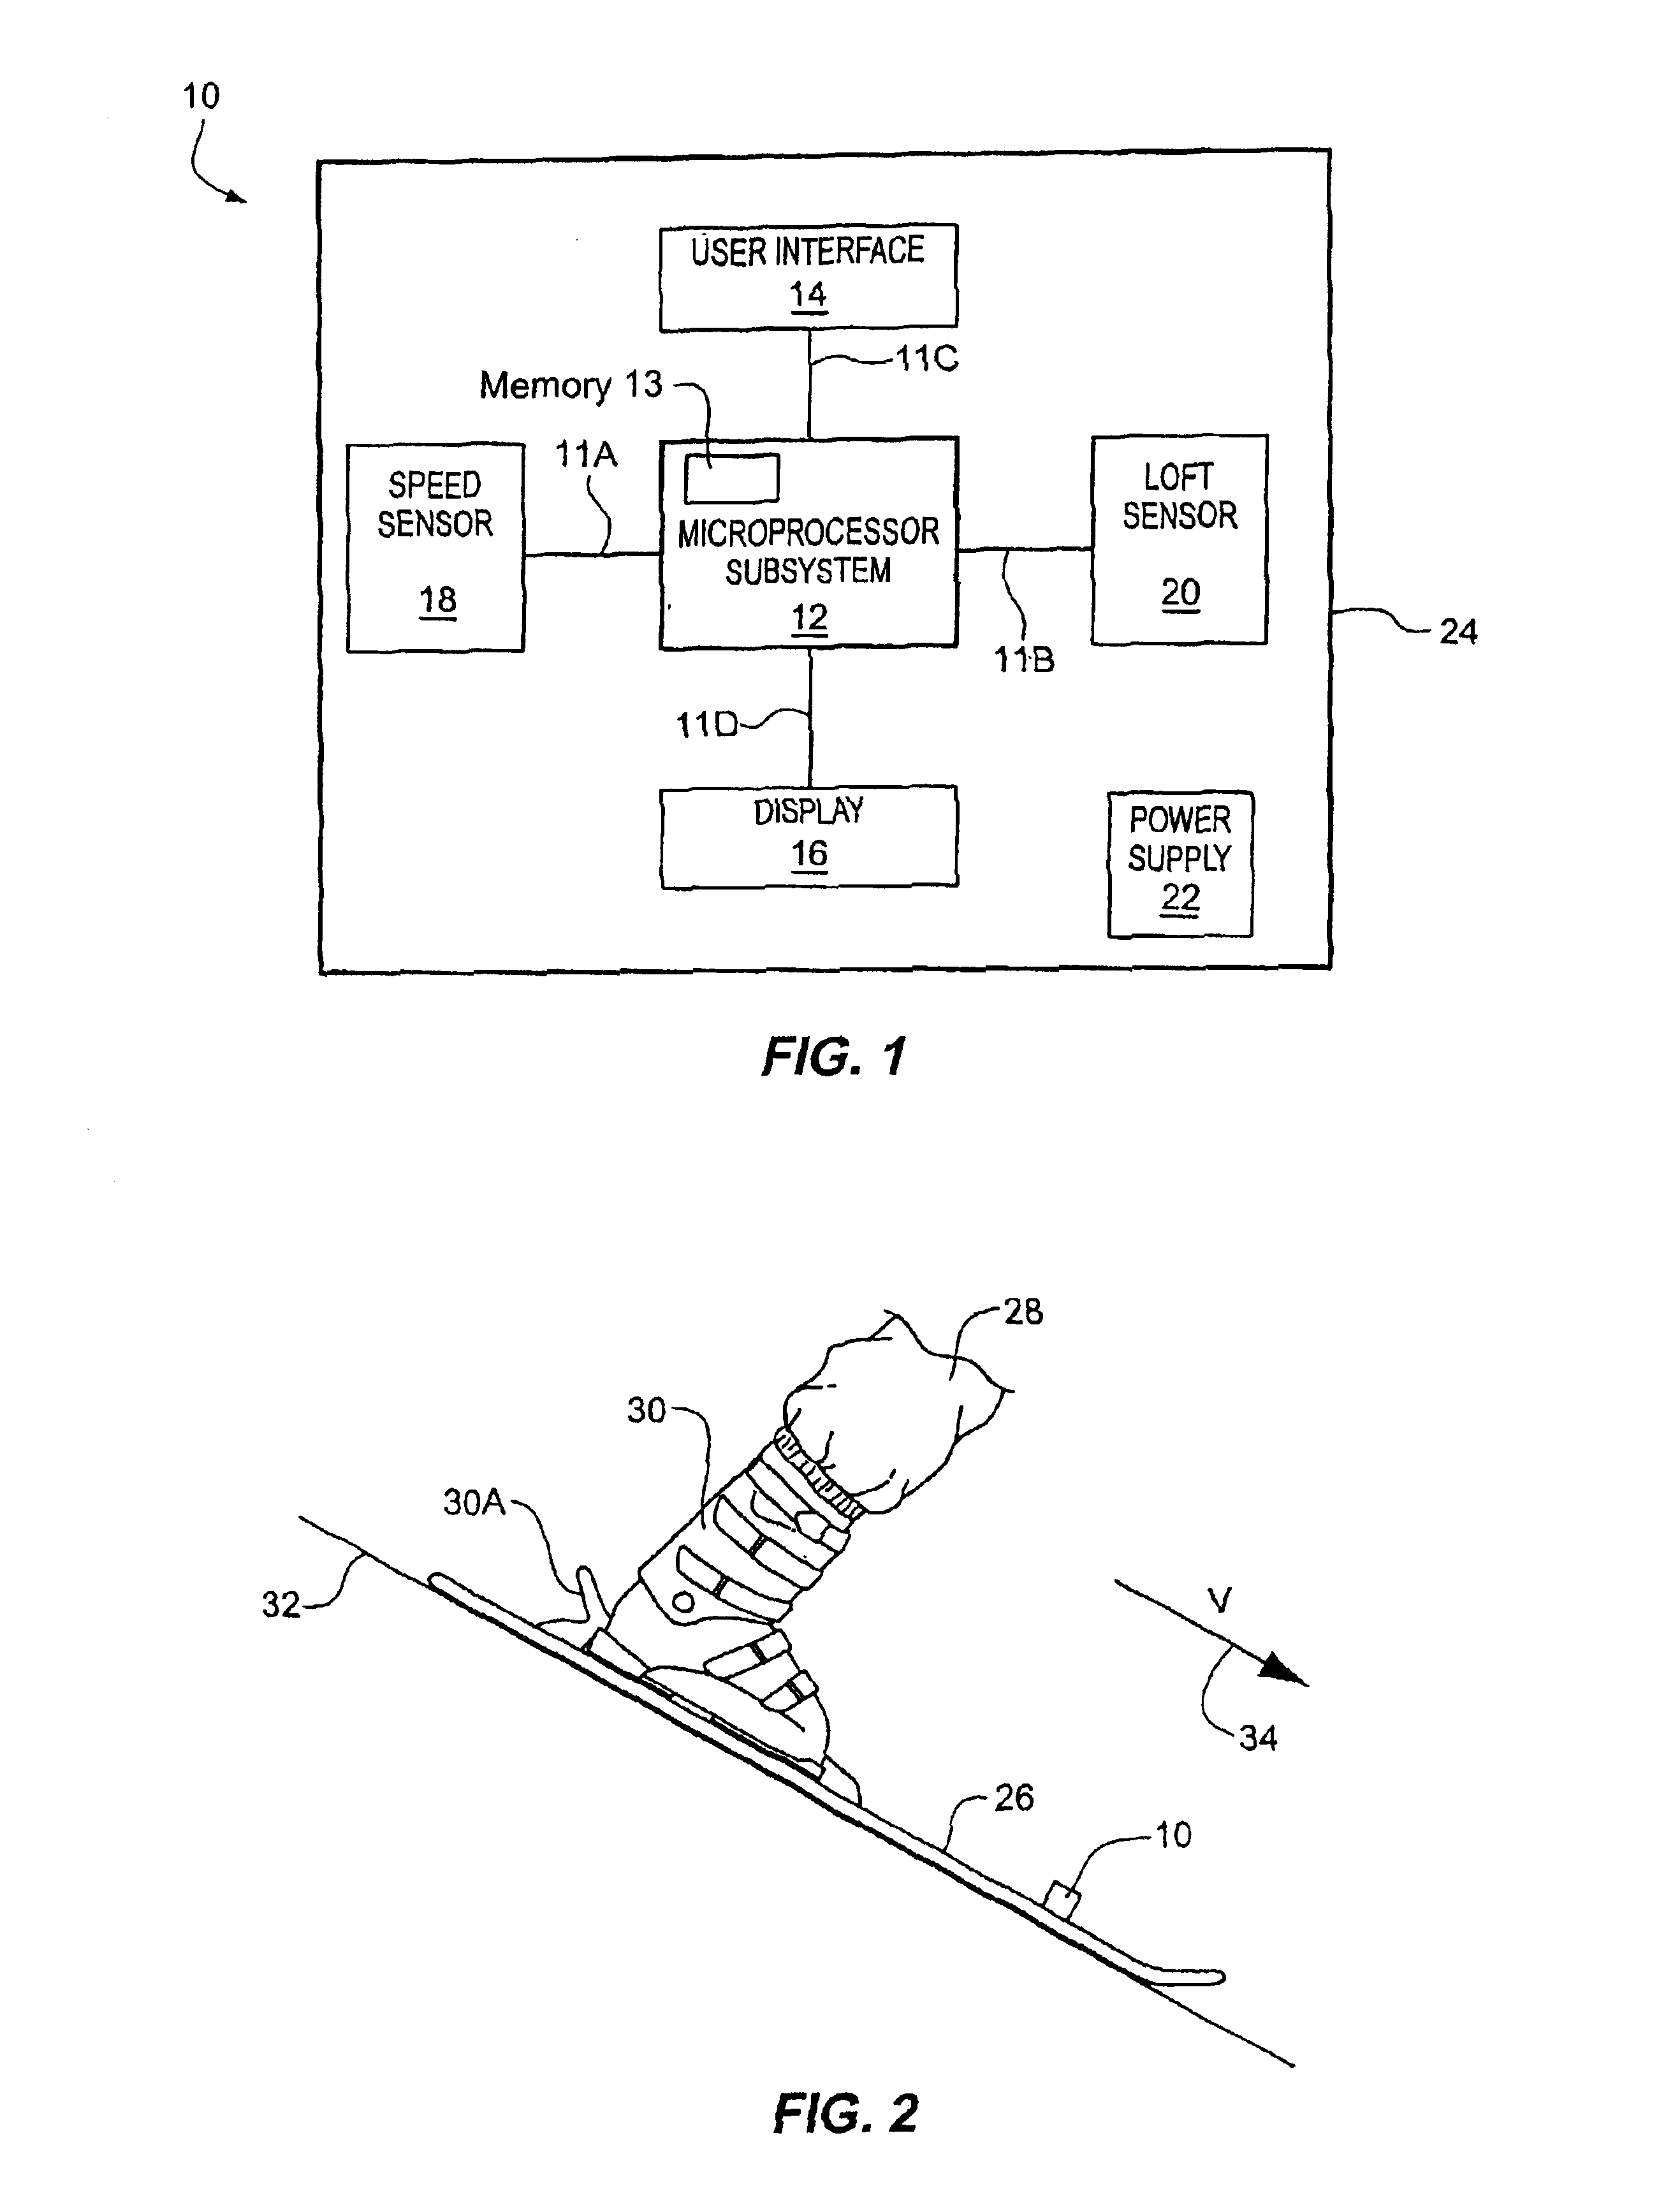 Mobile speedometer system and associated methods